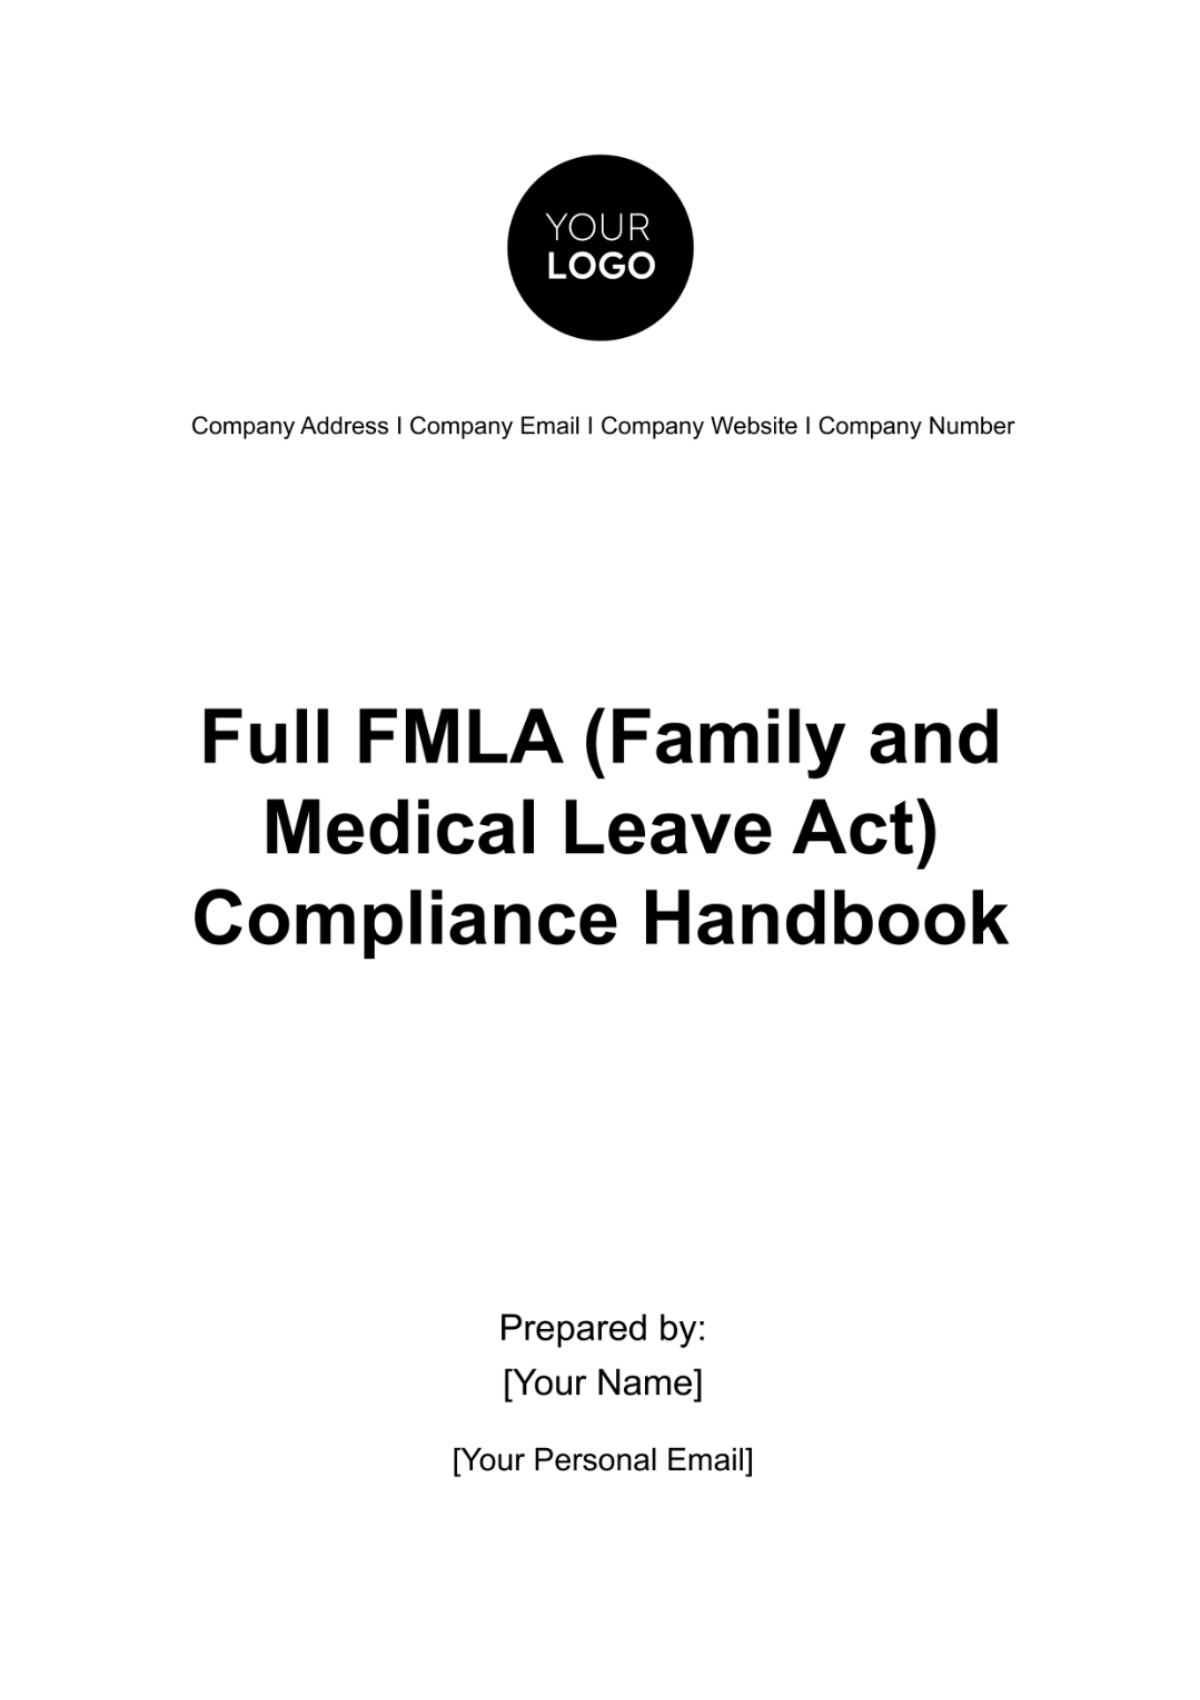 Free Full FMLA (Family and Medical Leave Act) Compliance Handbook HR Template